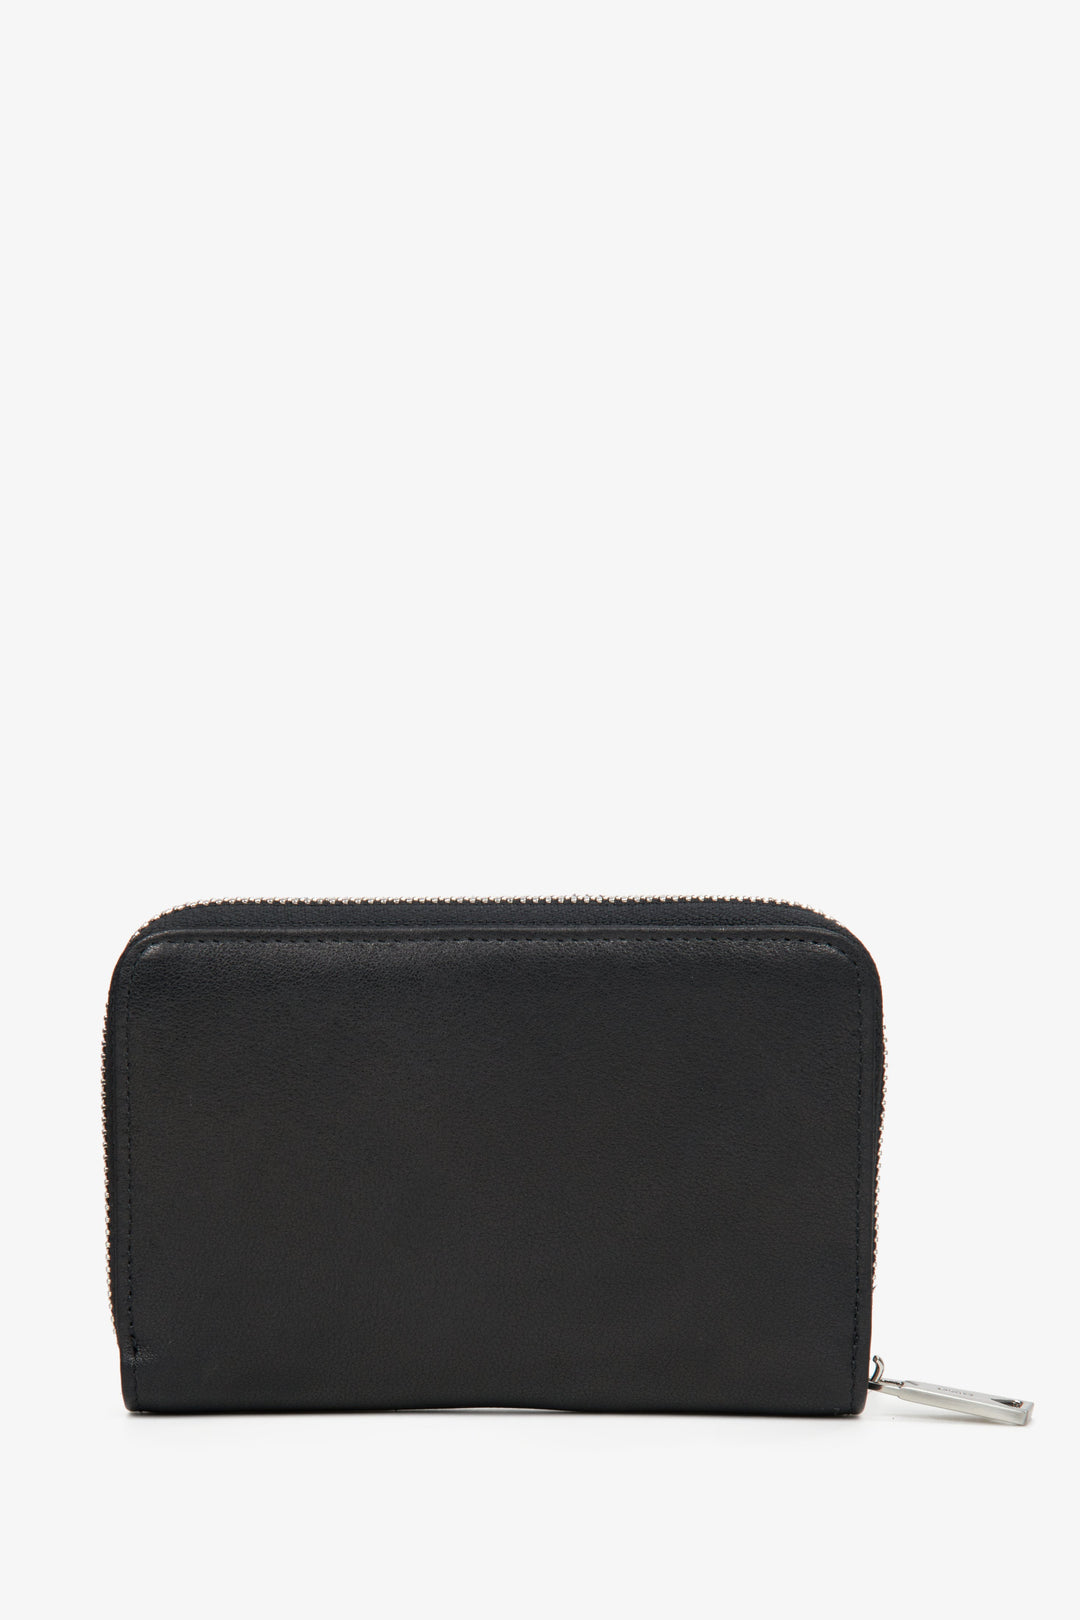 Men's black wallet with zipper made of genuine leather by Estro - back view of the model.